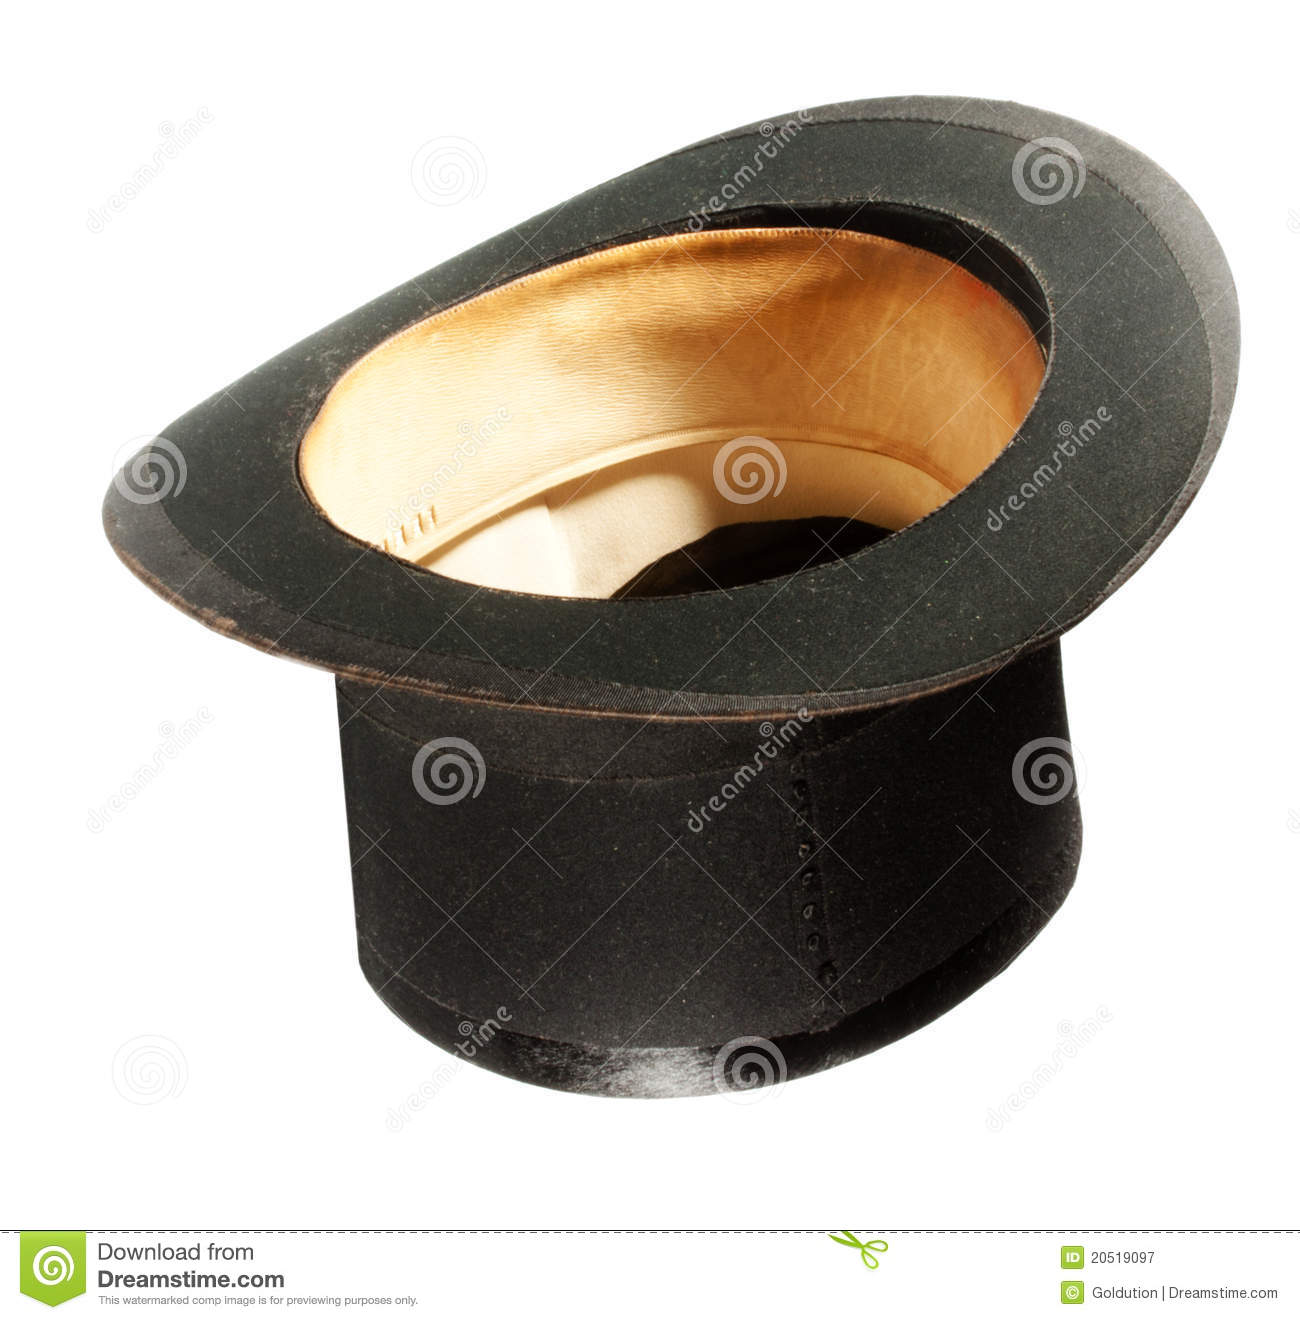 Retro Black Top Hat Upside Down Royalty Free Stock Photography   Image    